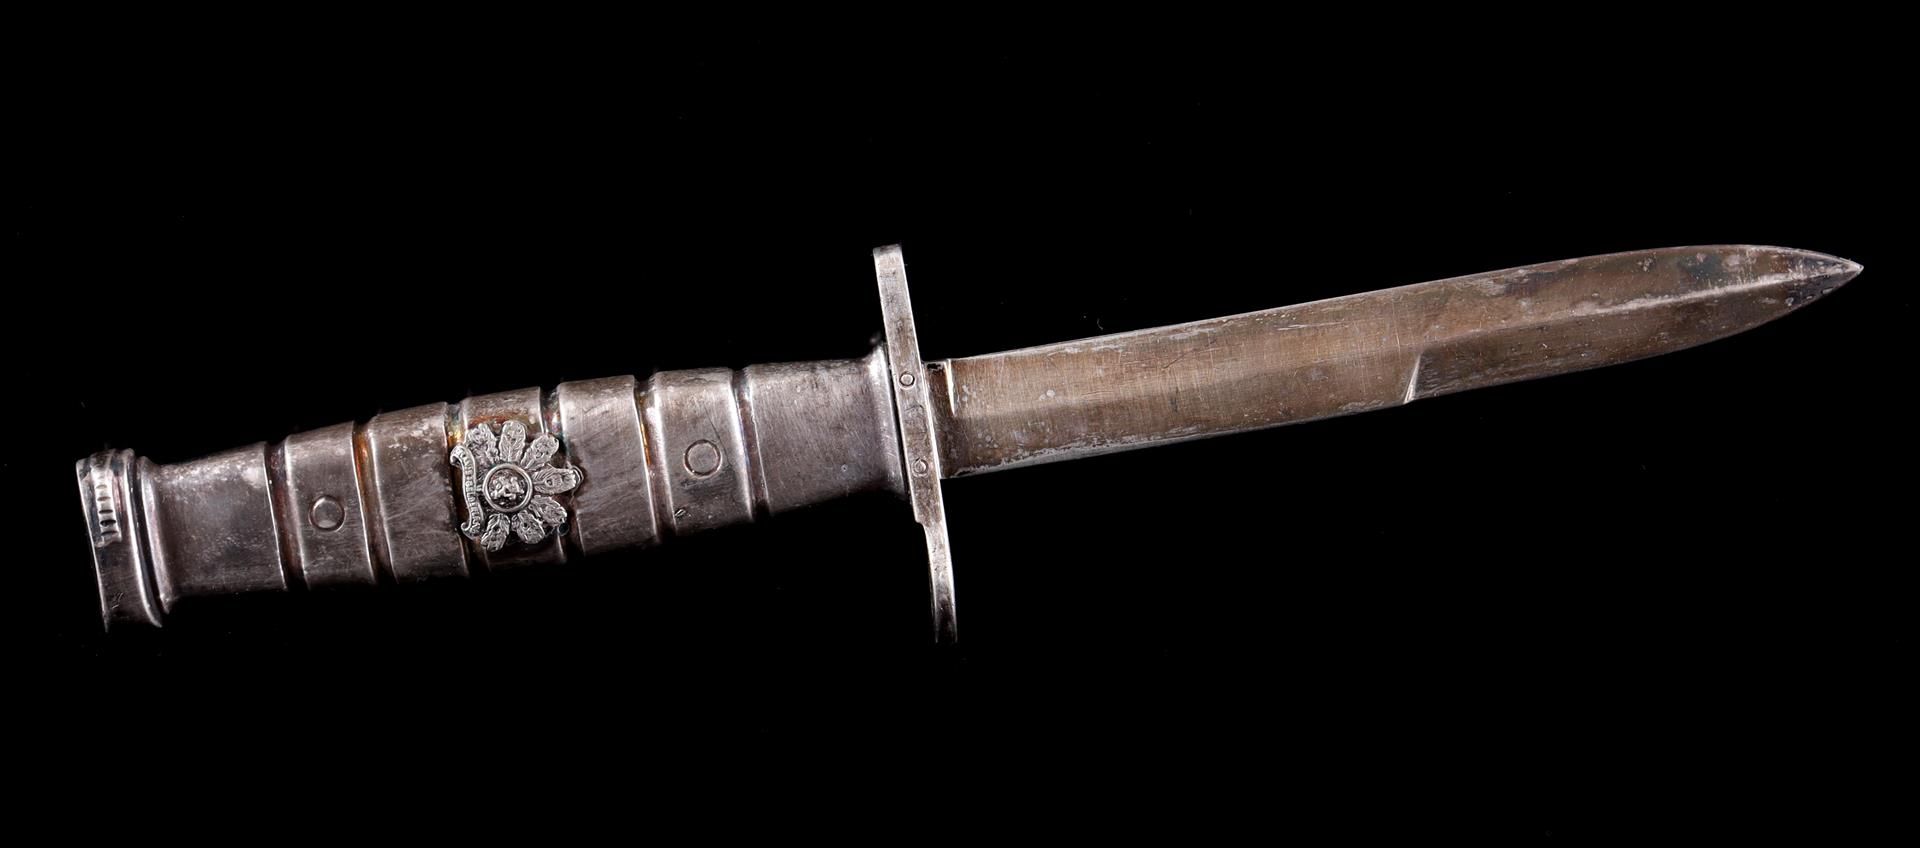 Metal letter opener in the shape of a dagger with an emblem